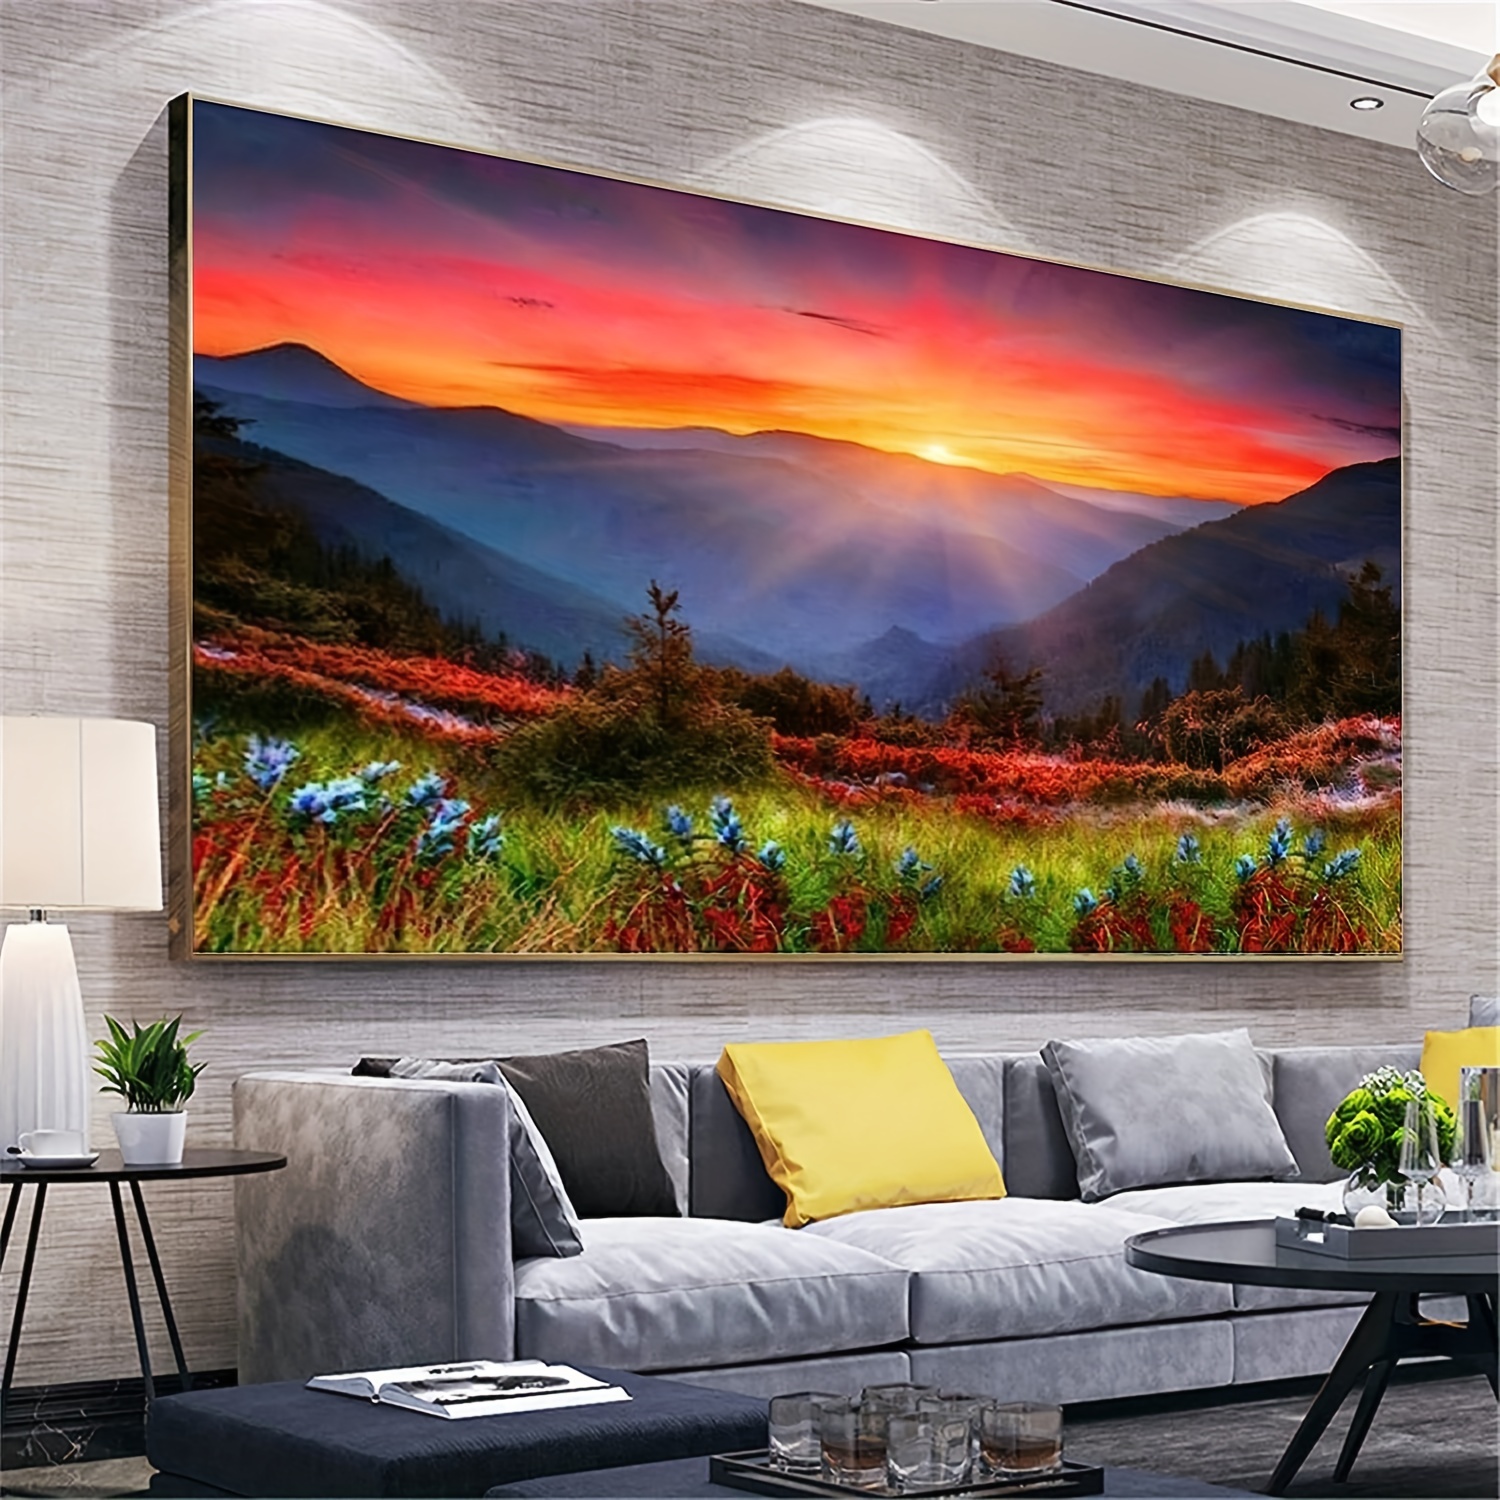 5d Diy Diamond Painting Kit For Adults And Kids - Large Size  (11.8x15.7in/30x40cm) - Landscape, Full Drill Round Diamond Art Kit, Home  Wall Decor